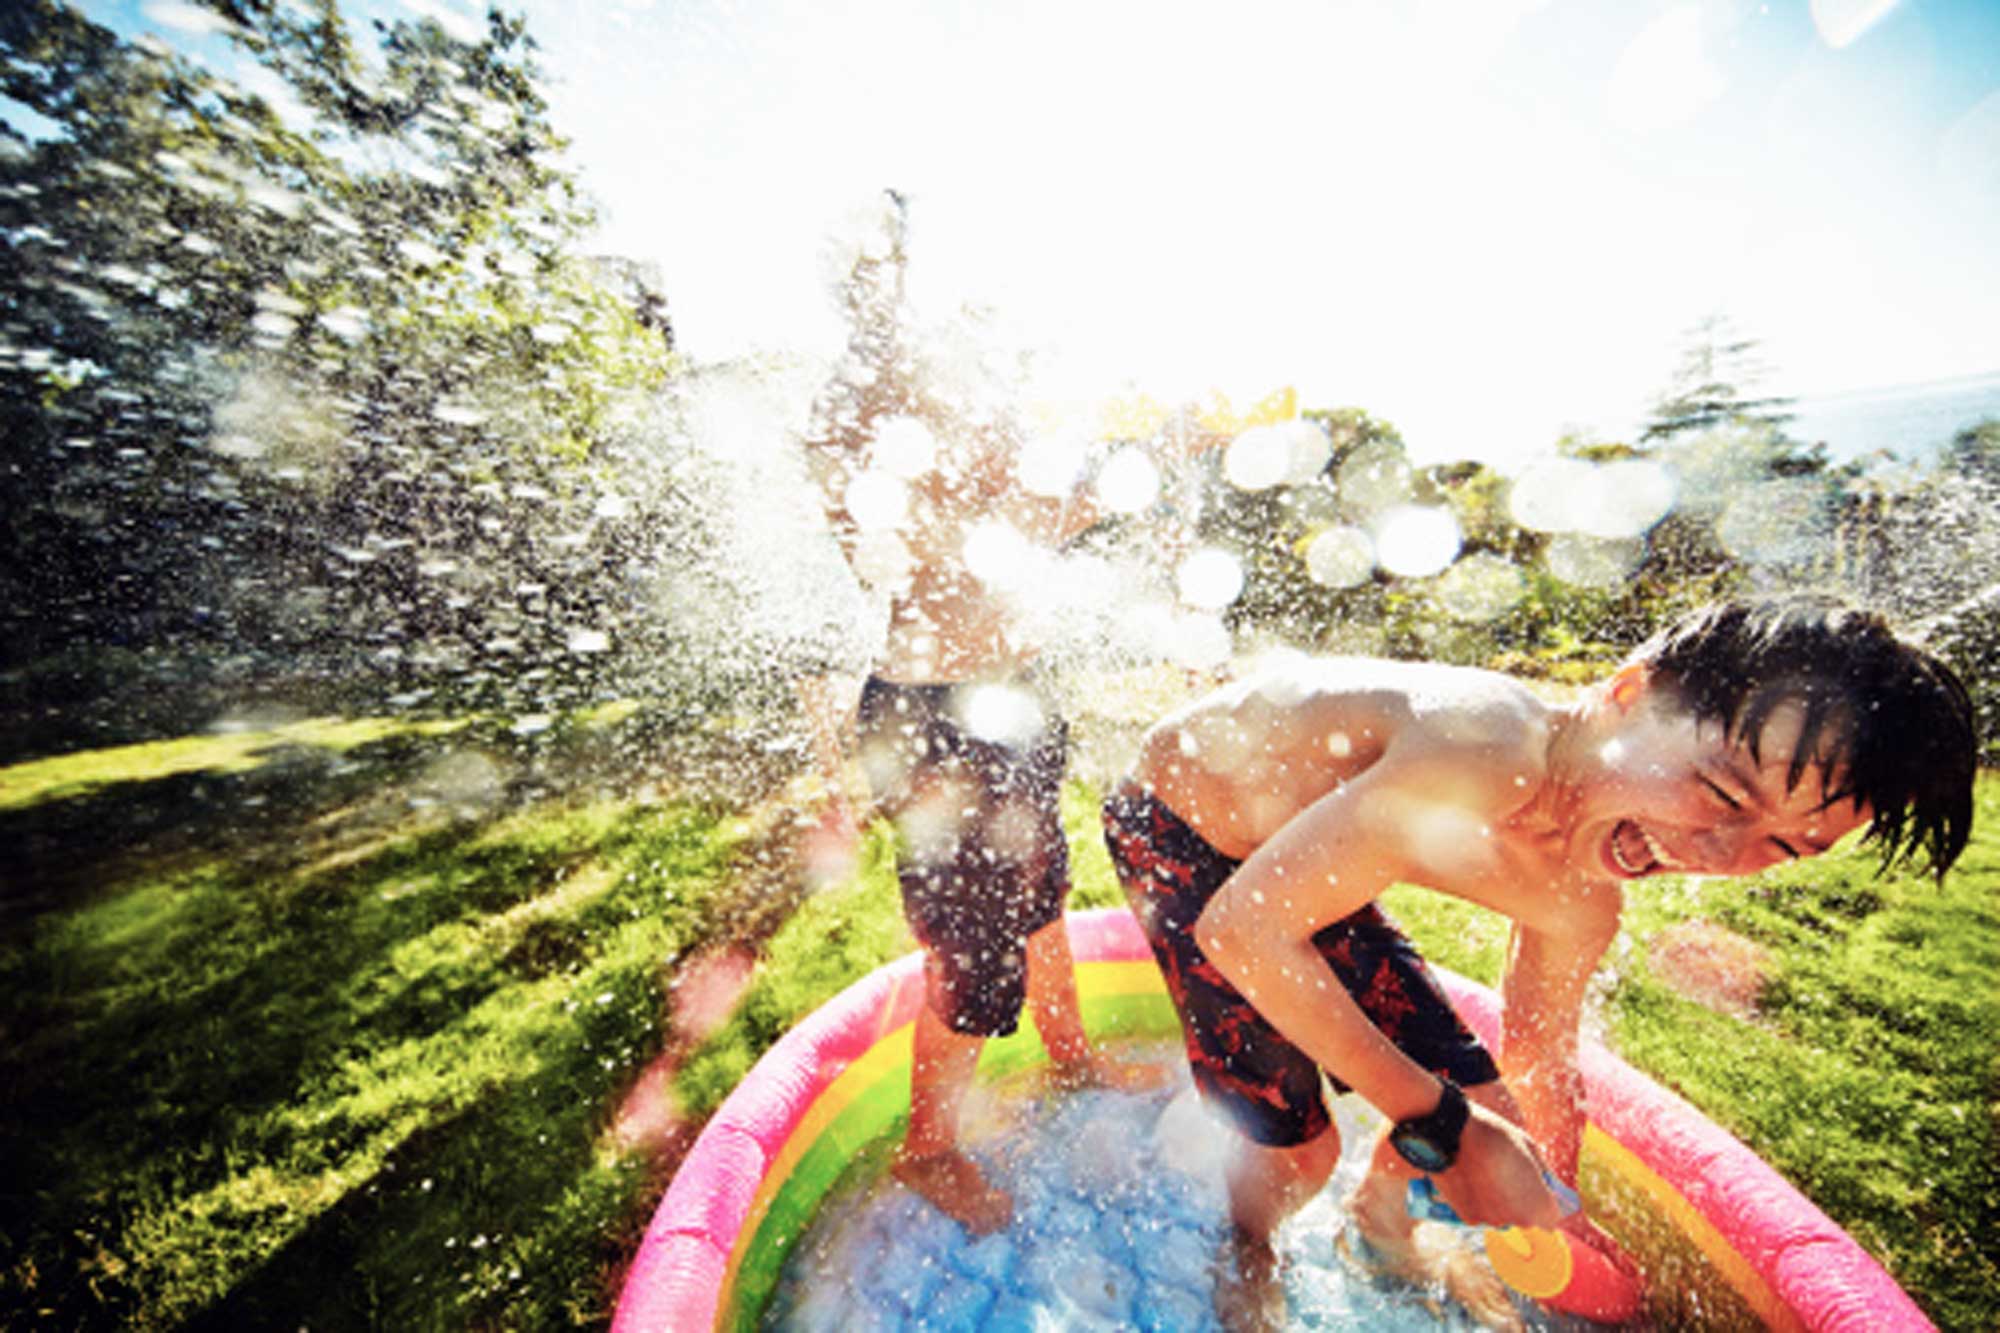 Cool Off with These DIY Water Games